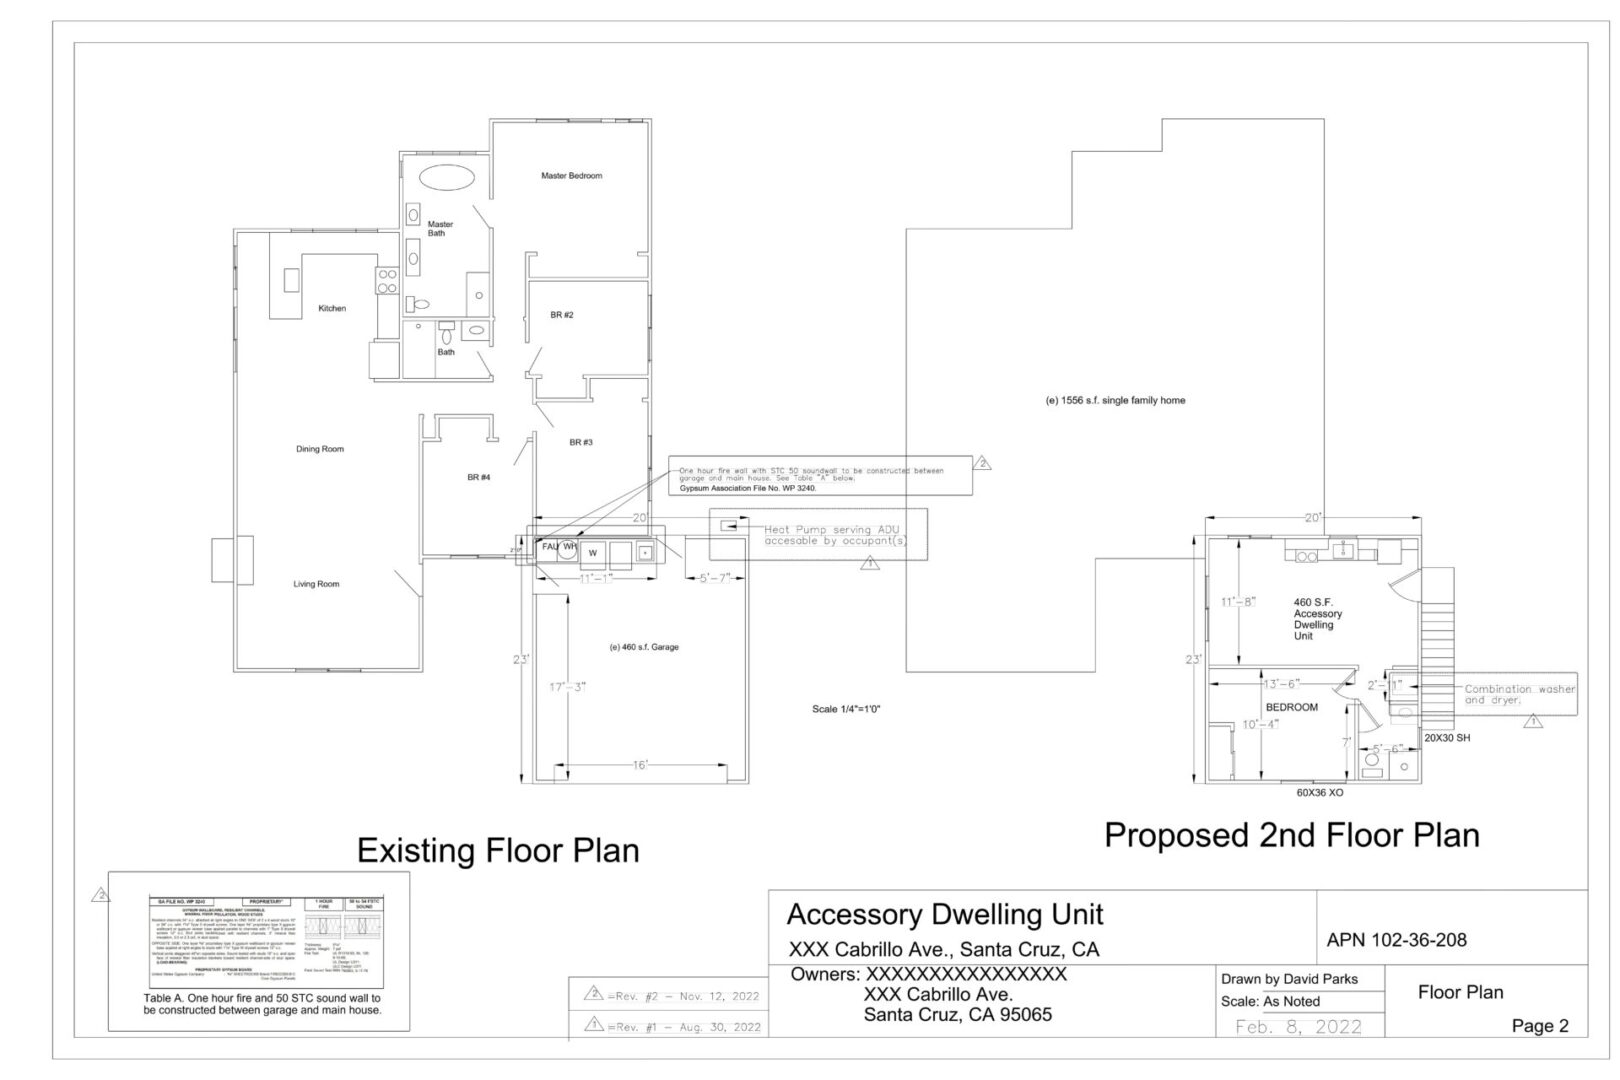 A floor plan of the existing and proposed 2 nd floor.